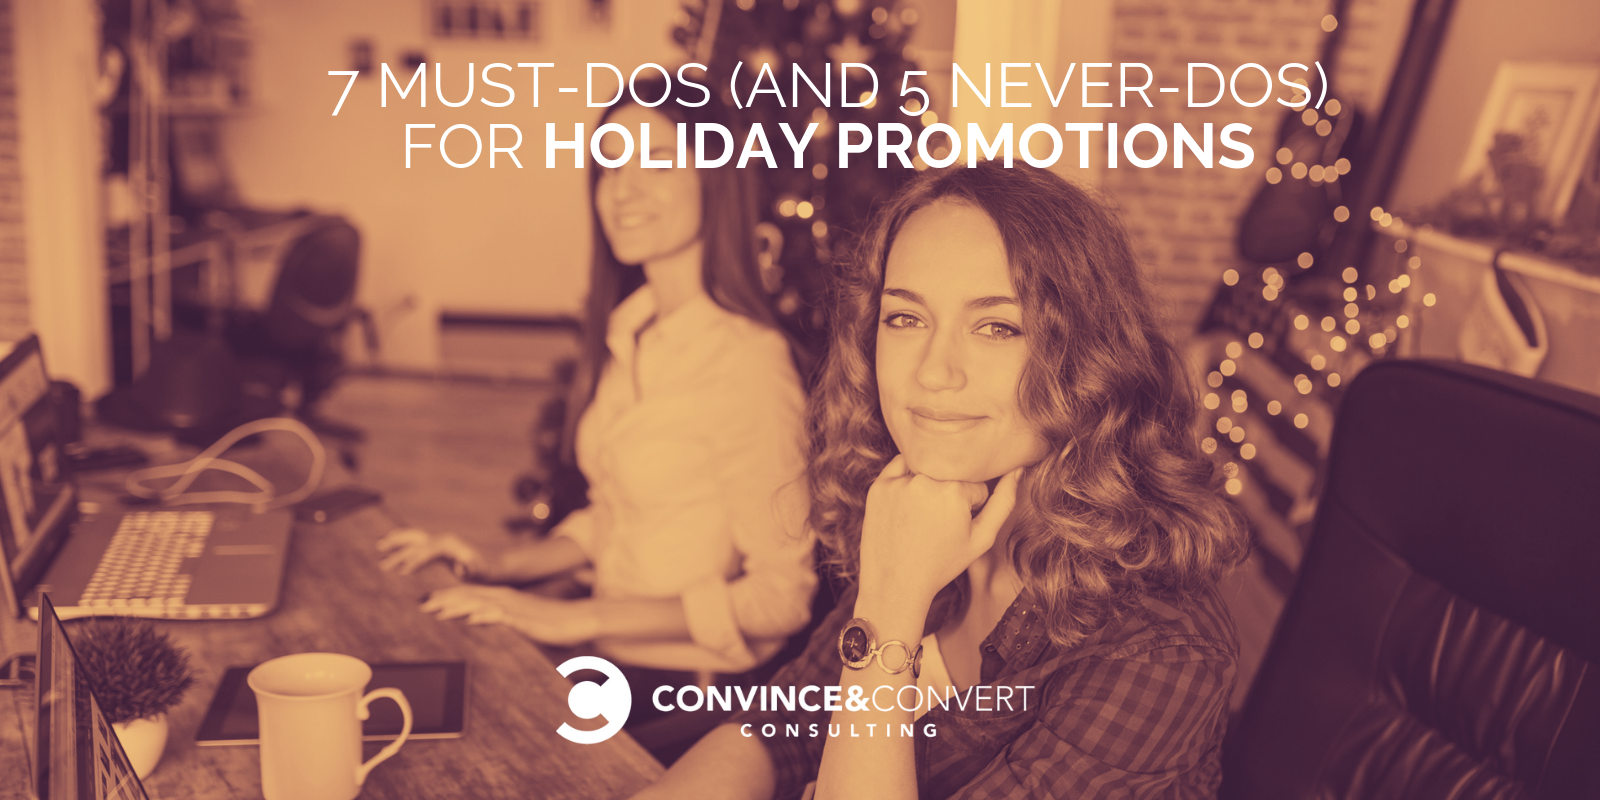 7 Must-Do's (og 5 Never-Do's) for Holiday Promotions